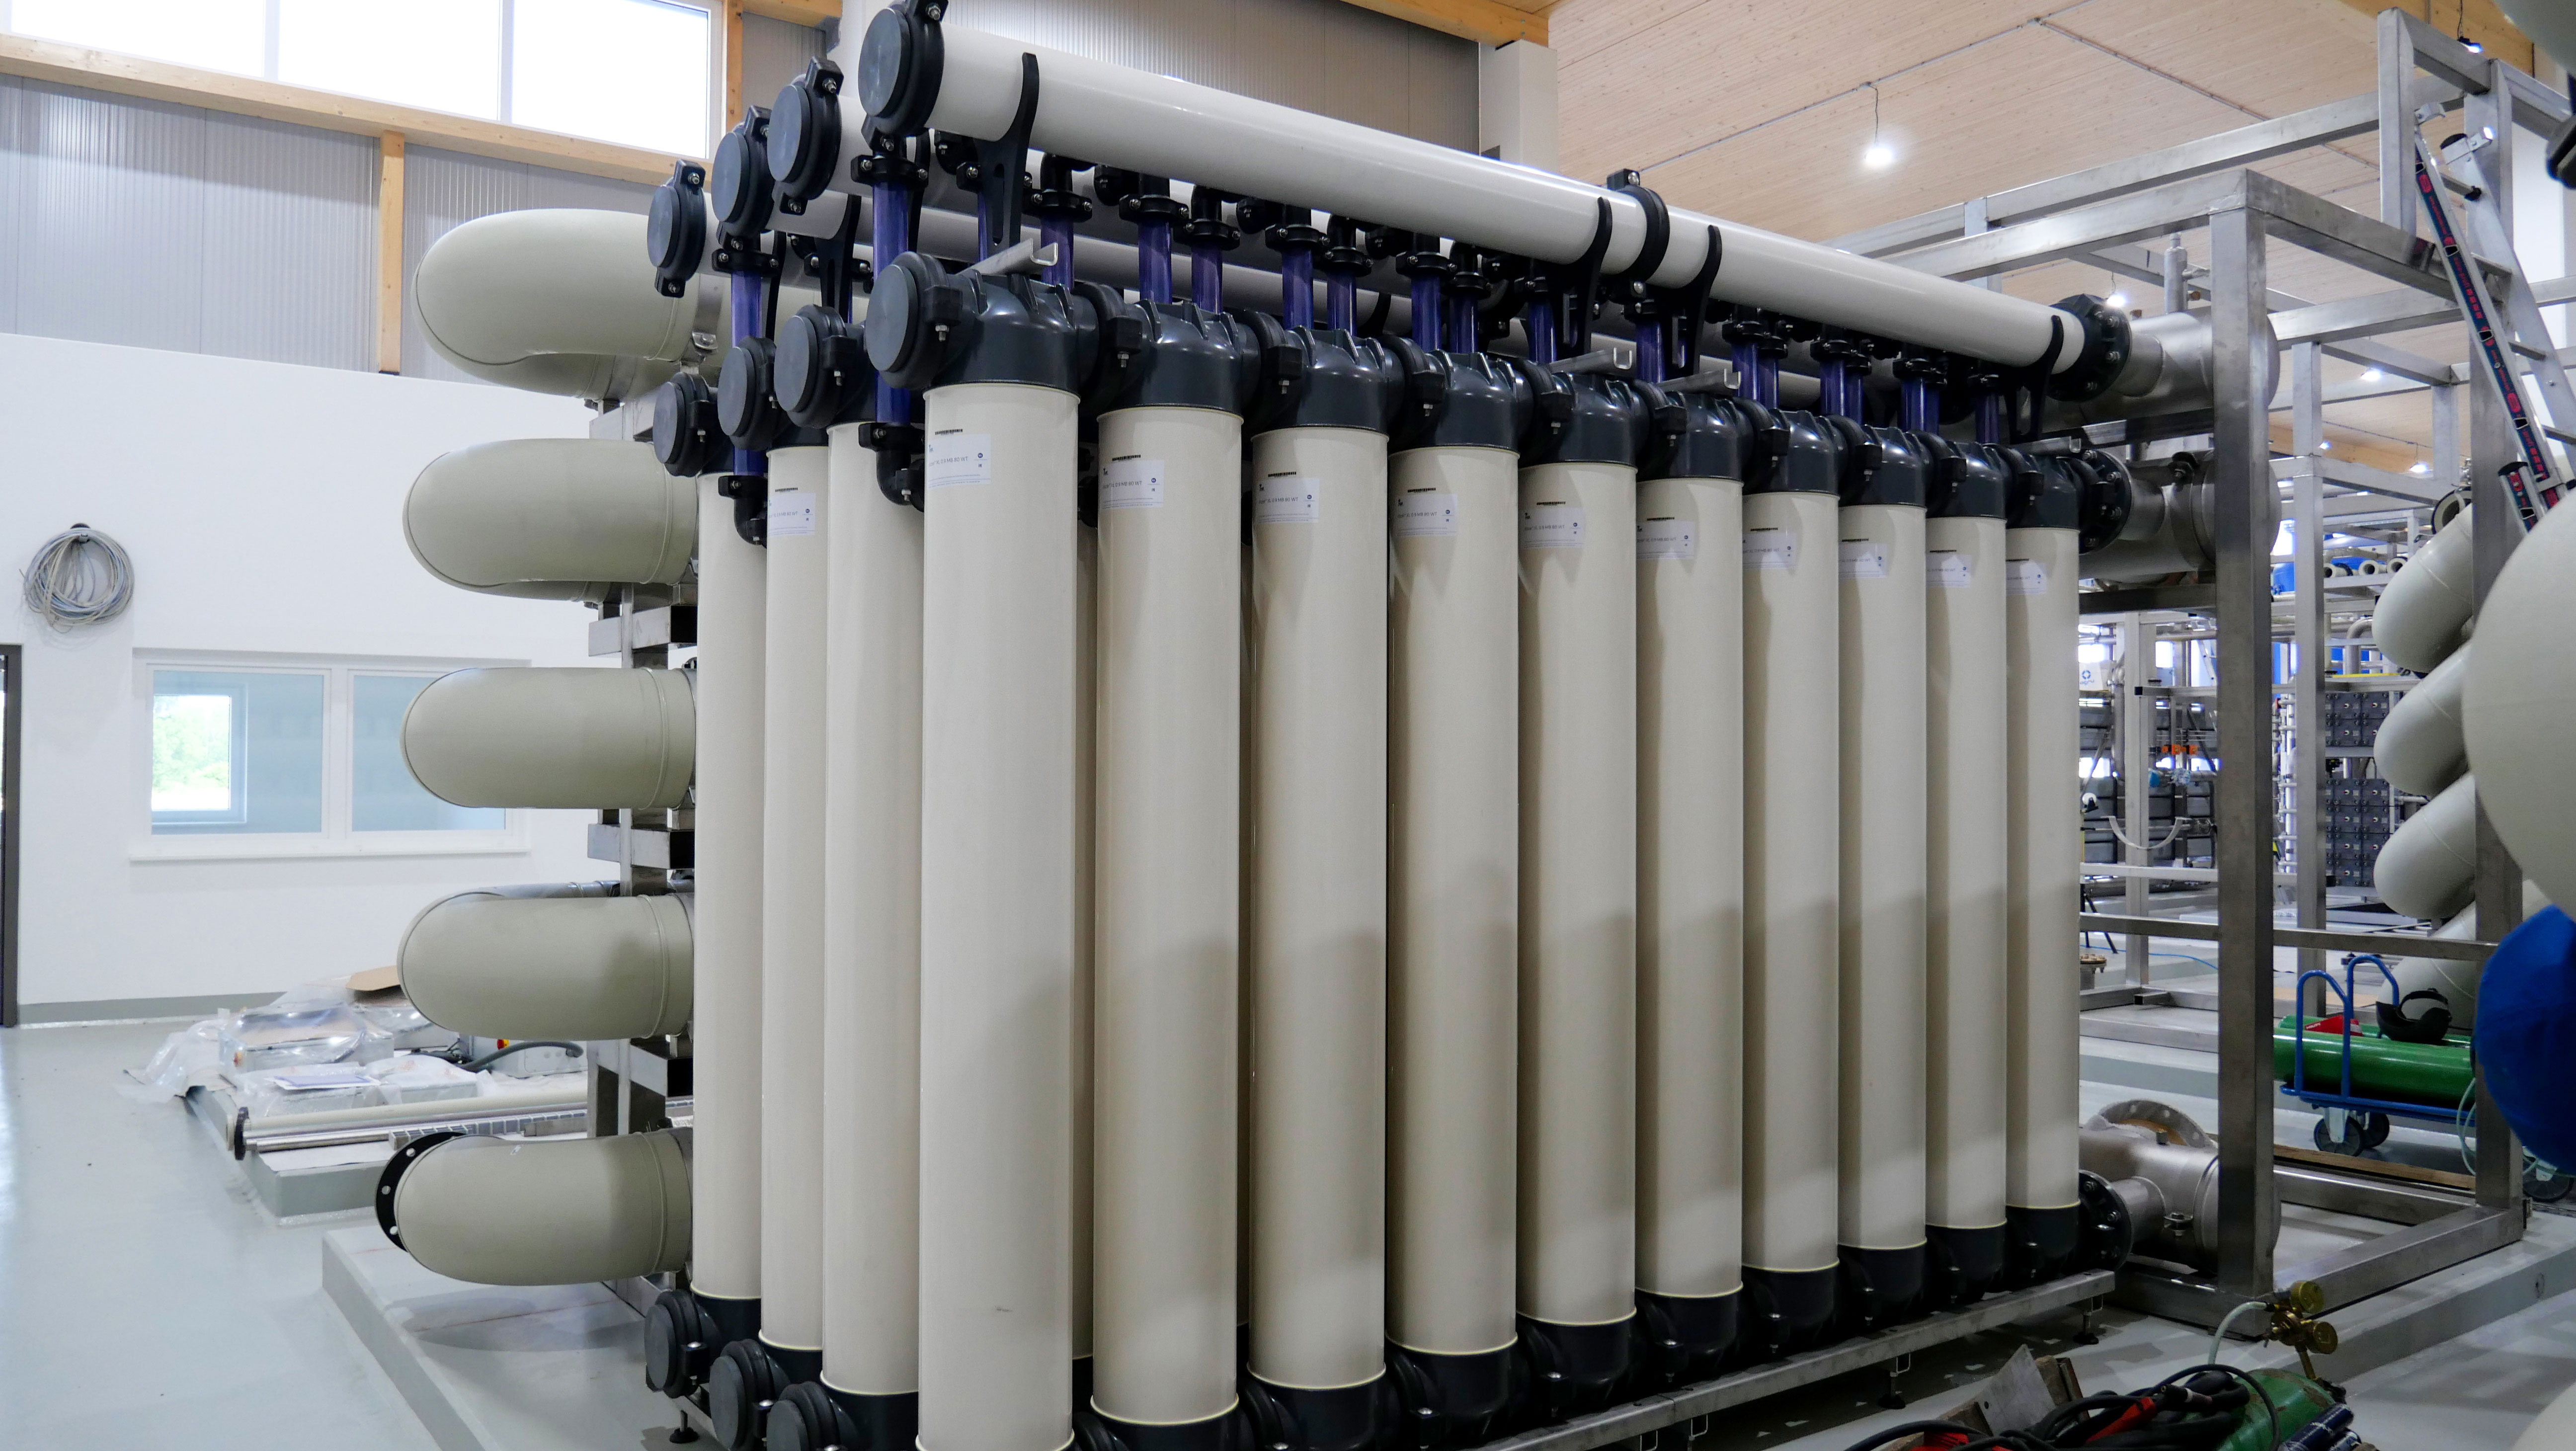 In the membrane filters, the water is softened without chemical additives.